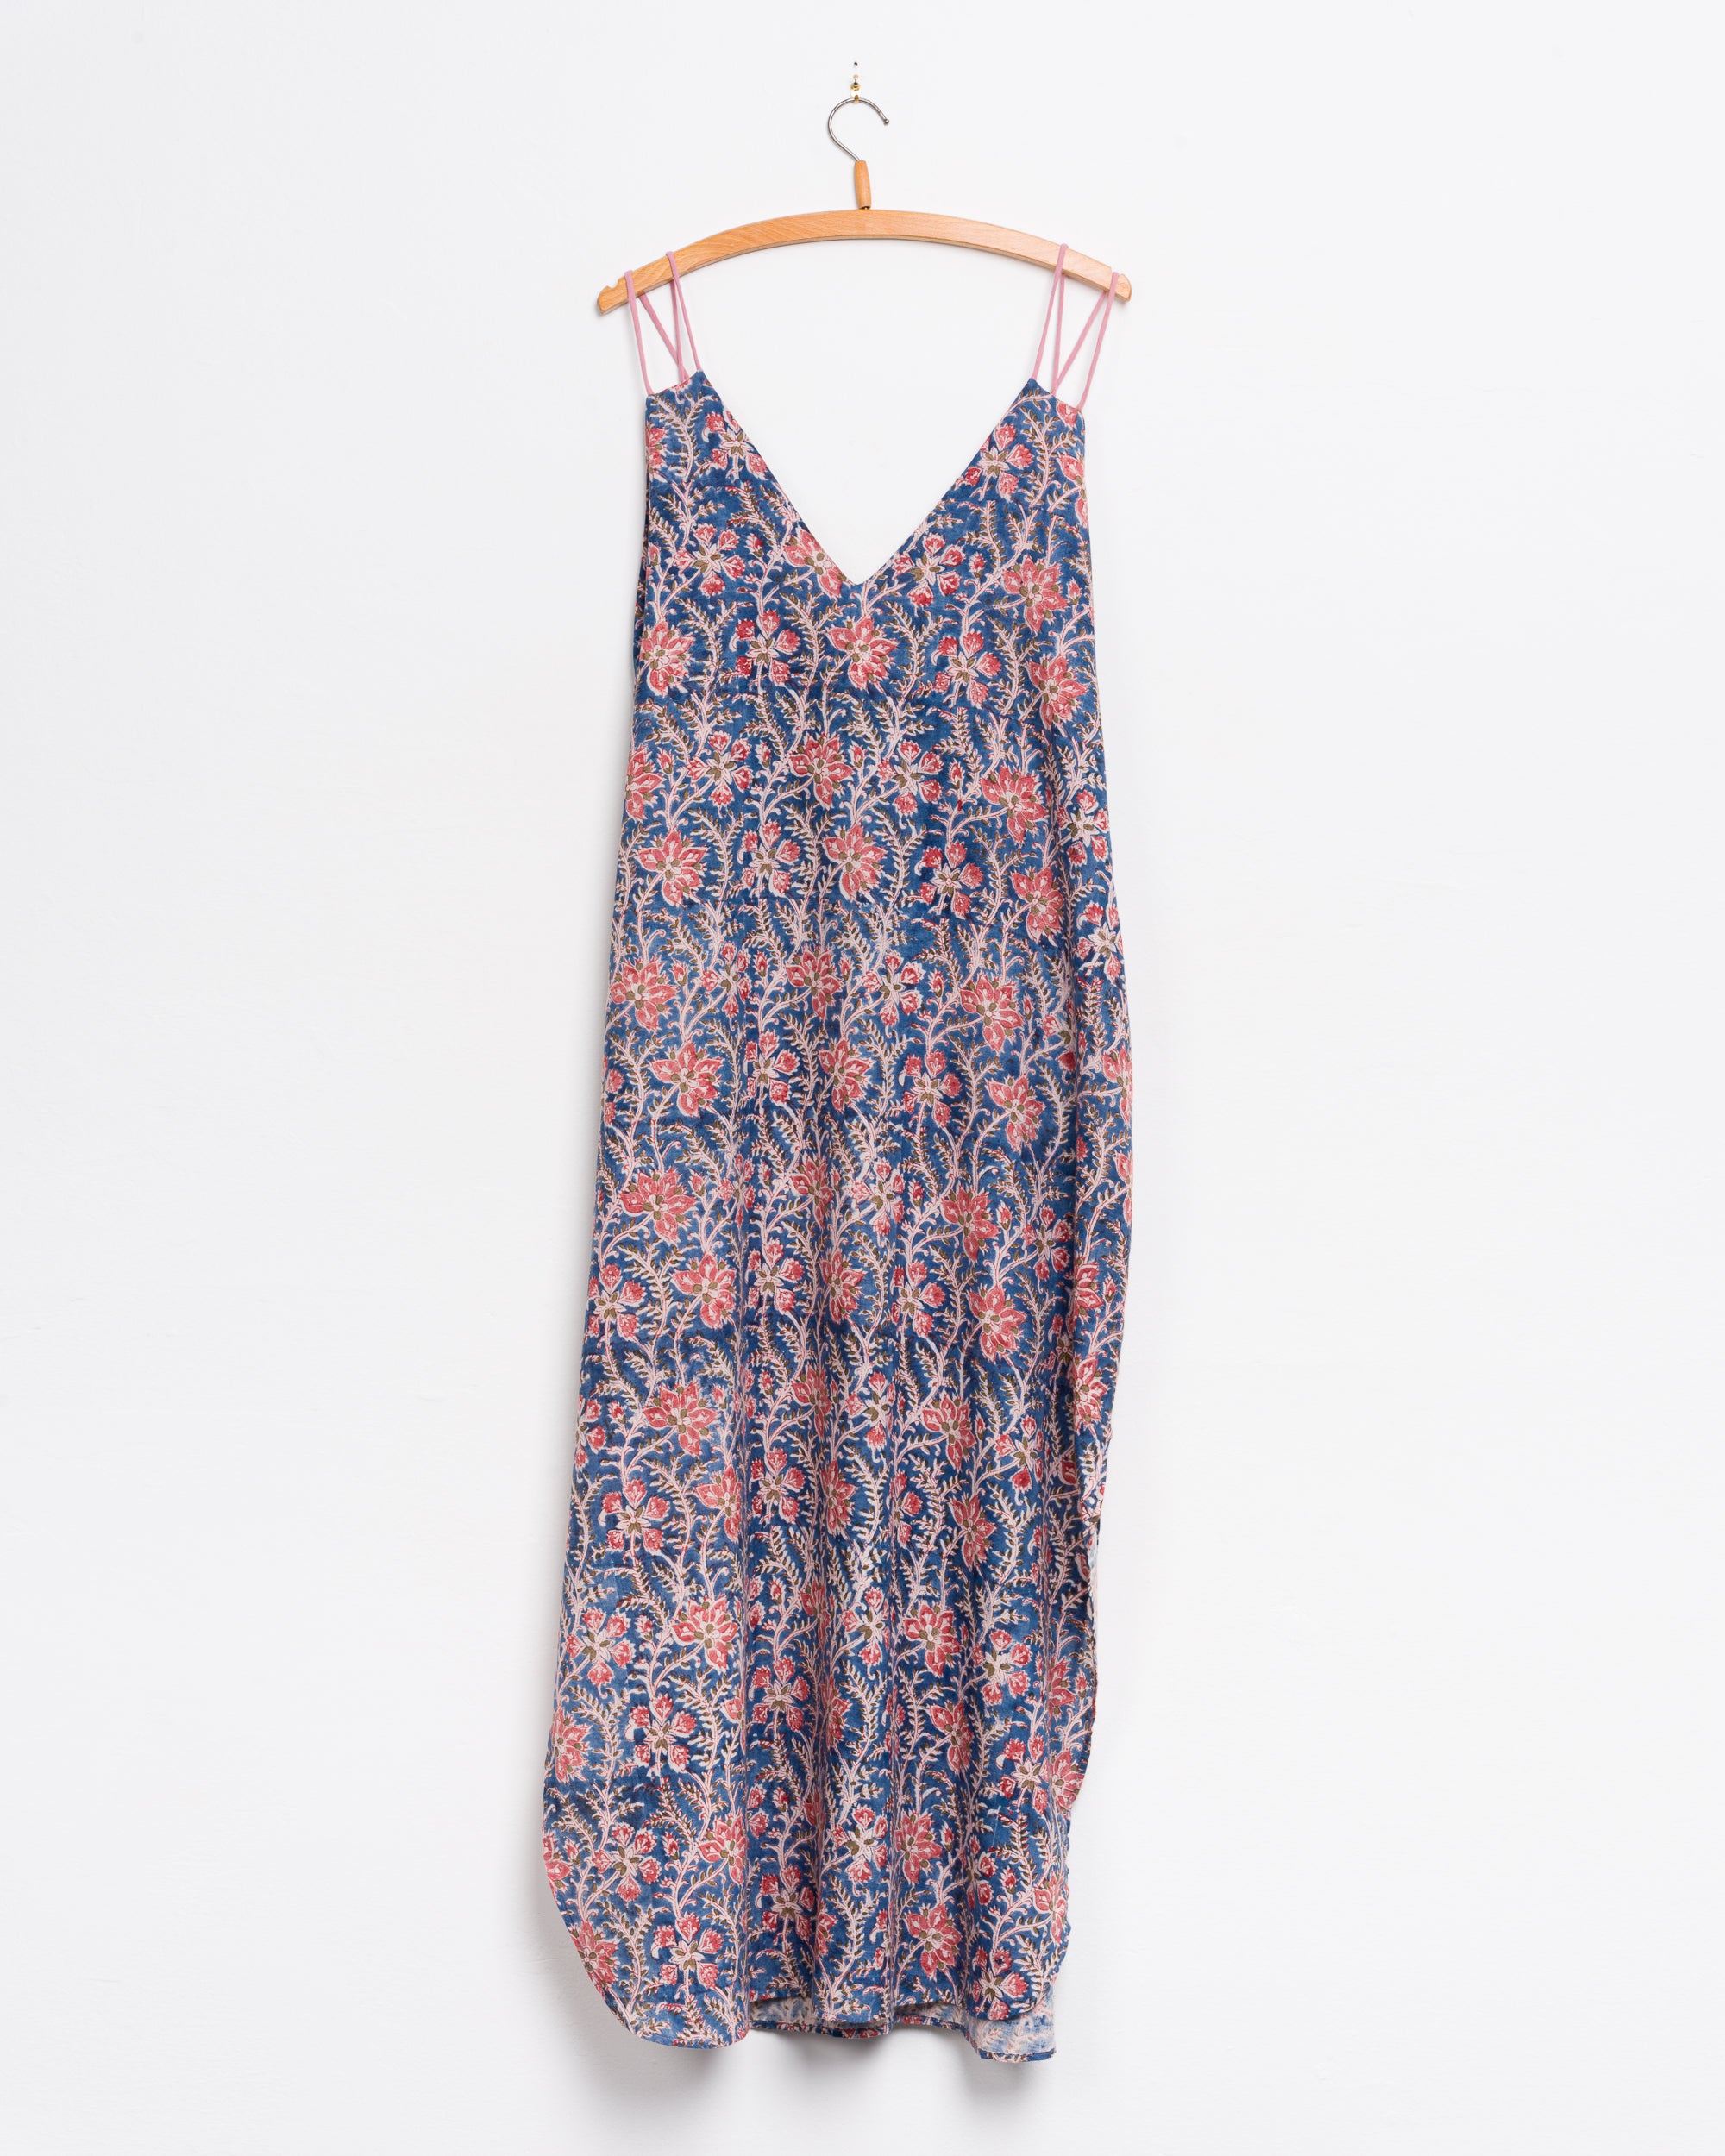 Grishma Camisole Dress in Blue Floral